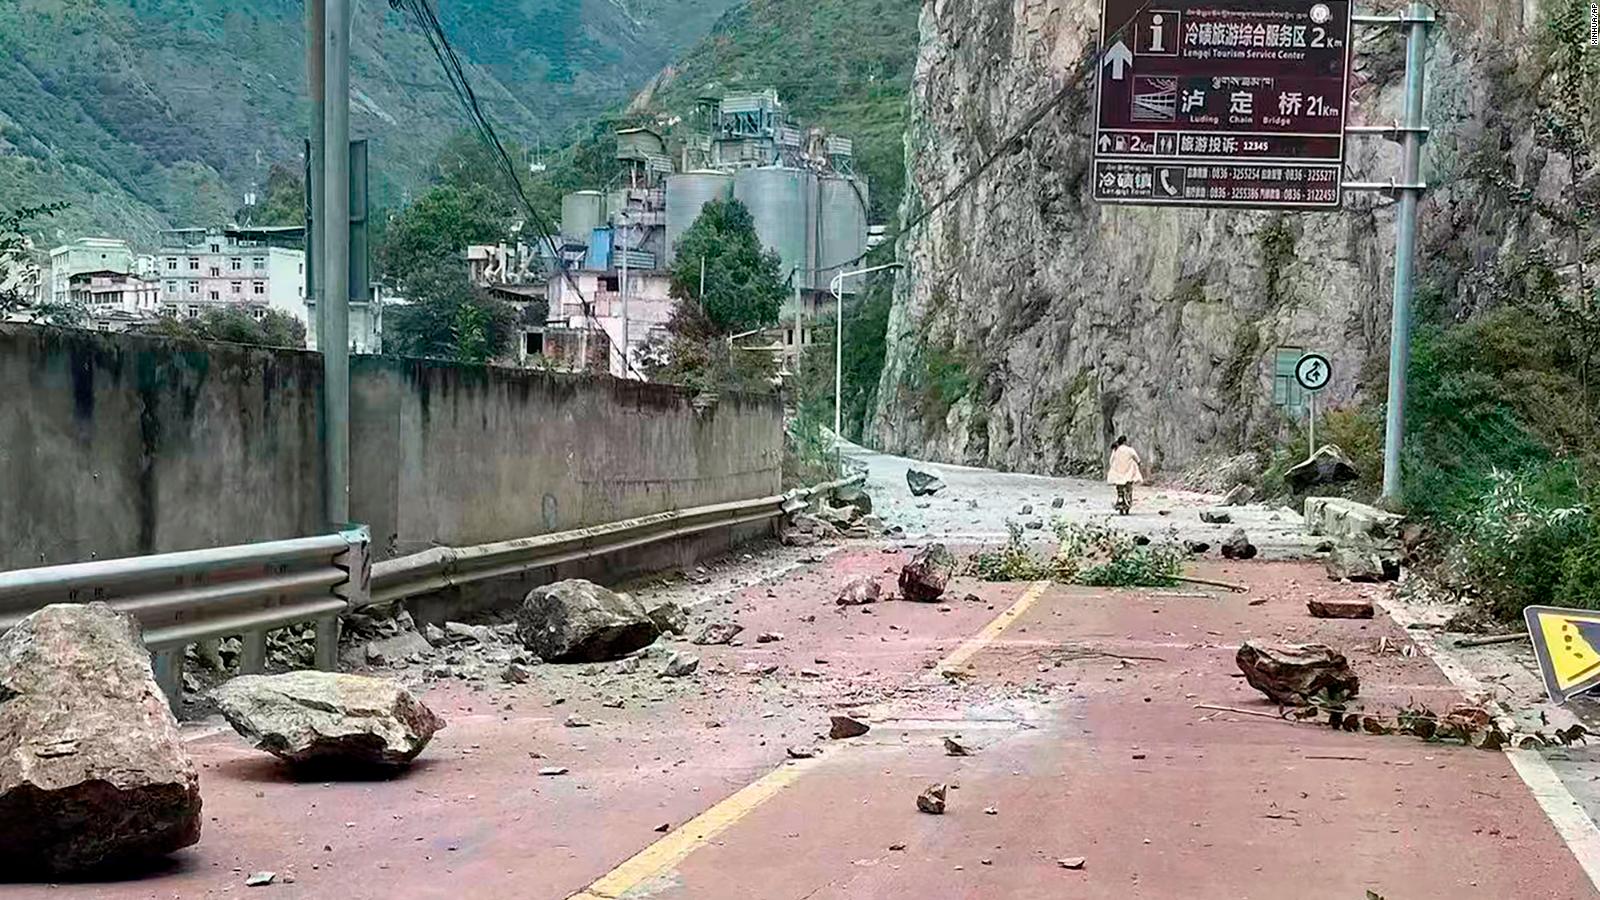 A 6.6 magnitude earthquake in China’s Sichuan province has claimed lives.